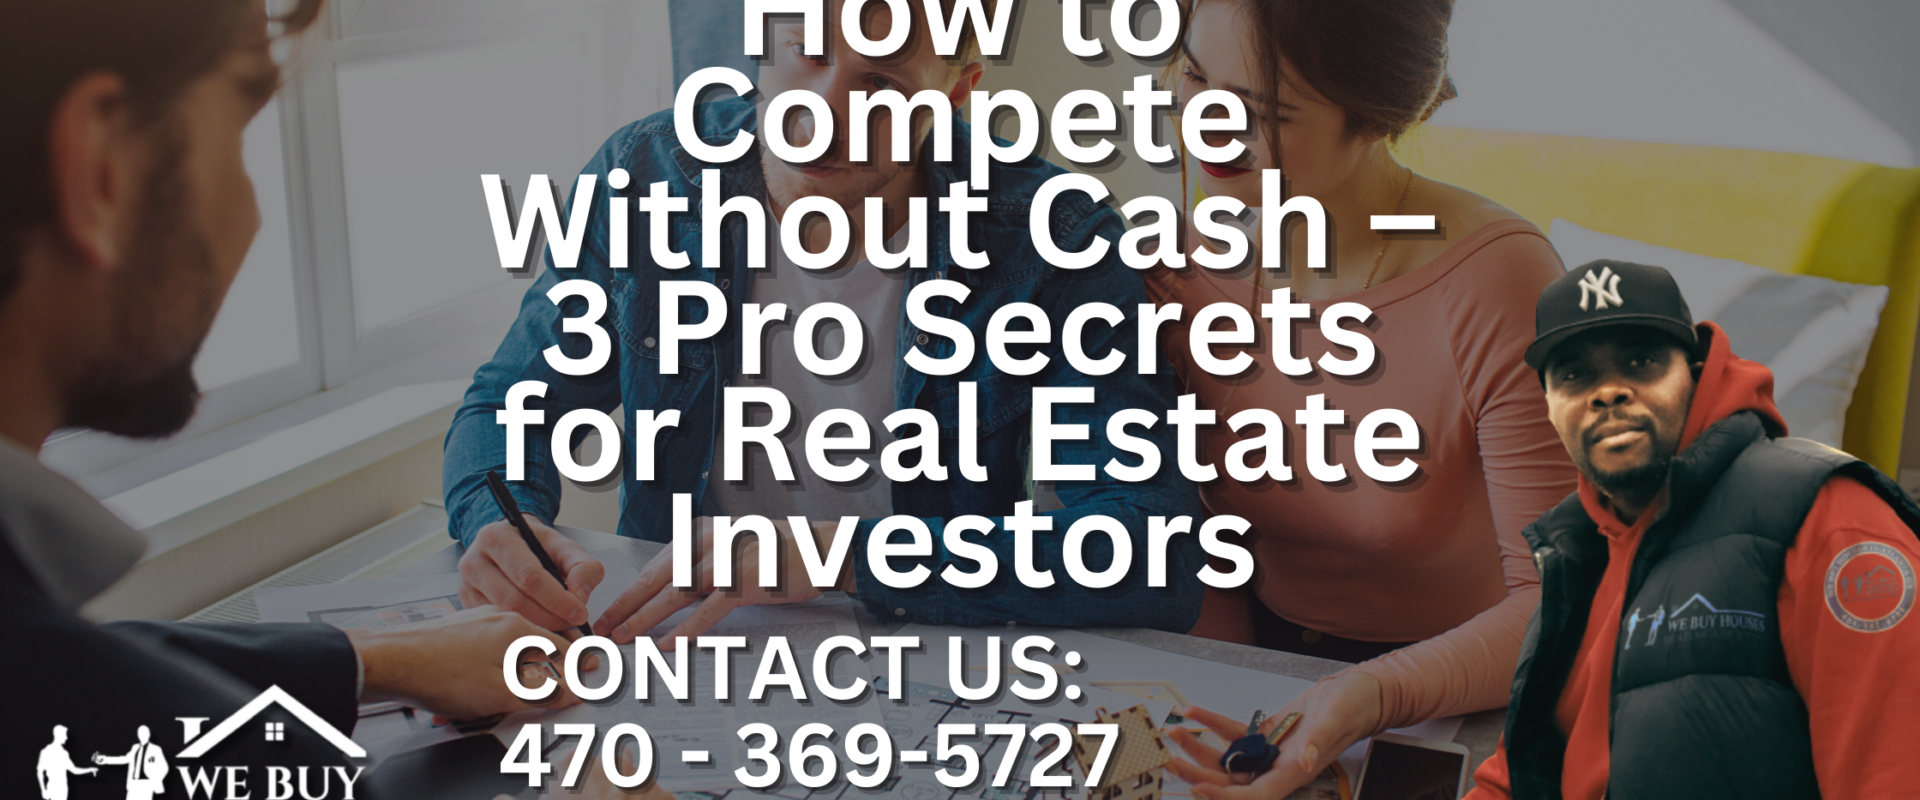 How to Compete Without Cash – 3 Pro Secrets for Real Estate Investors